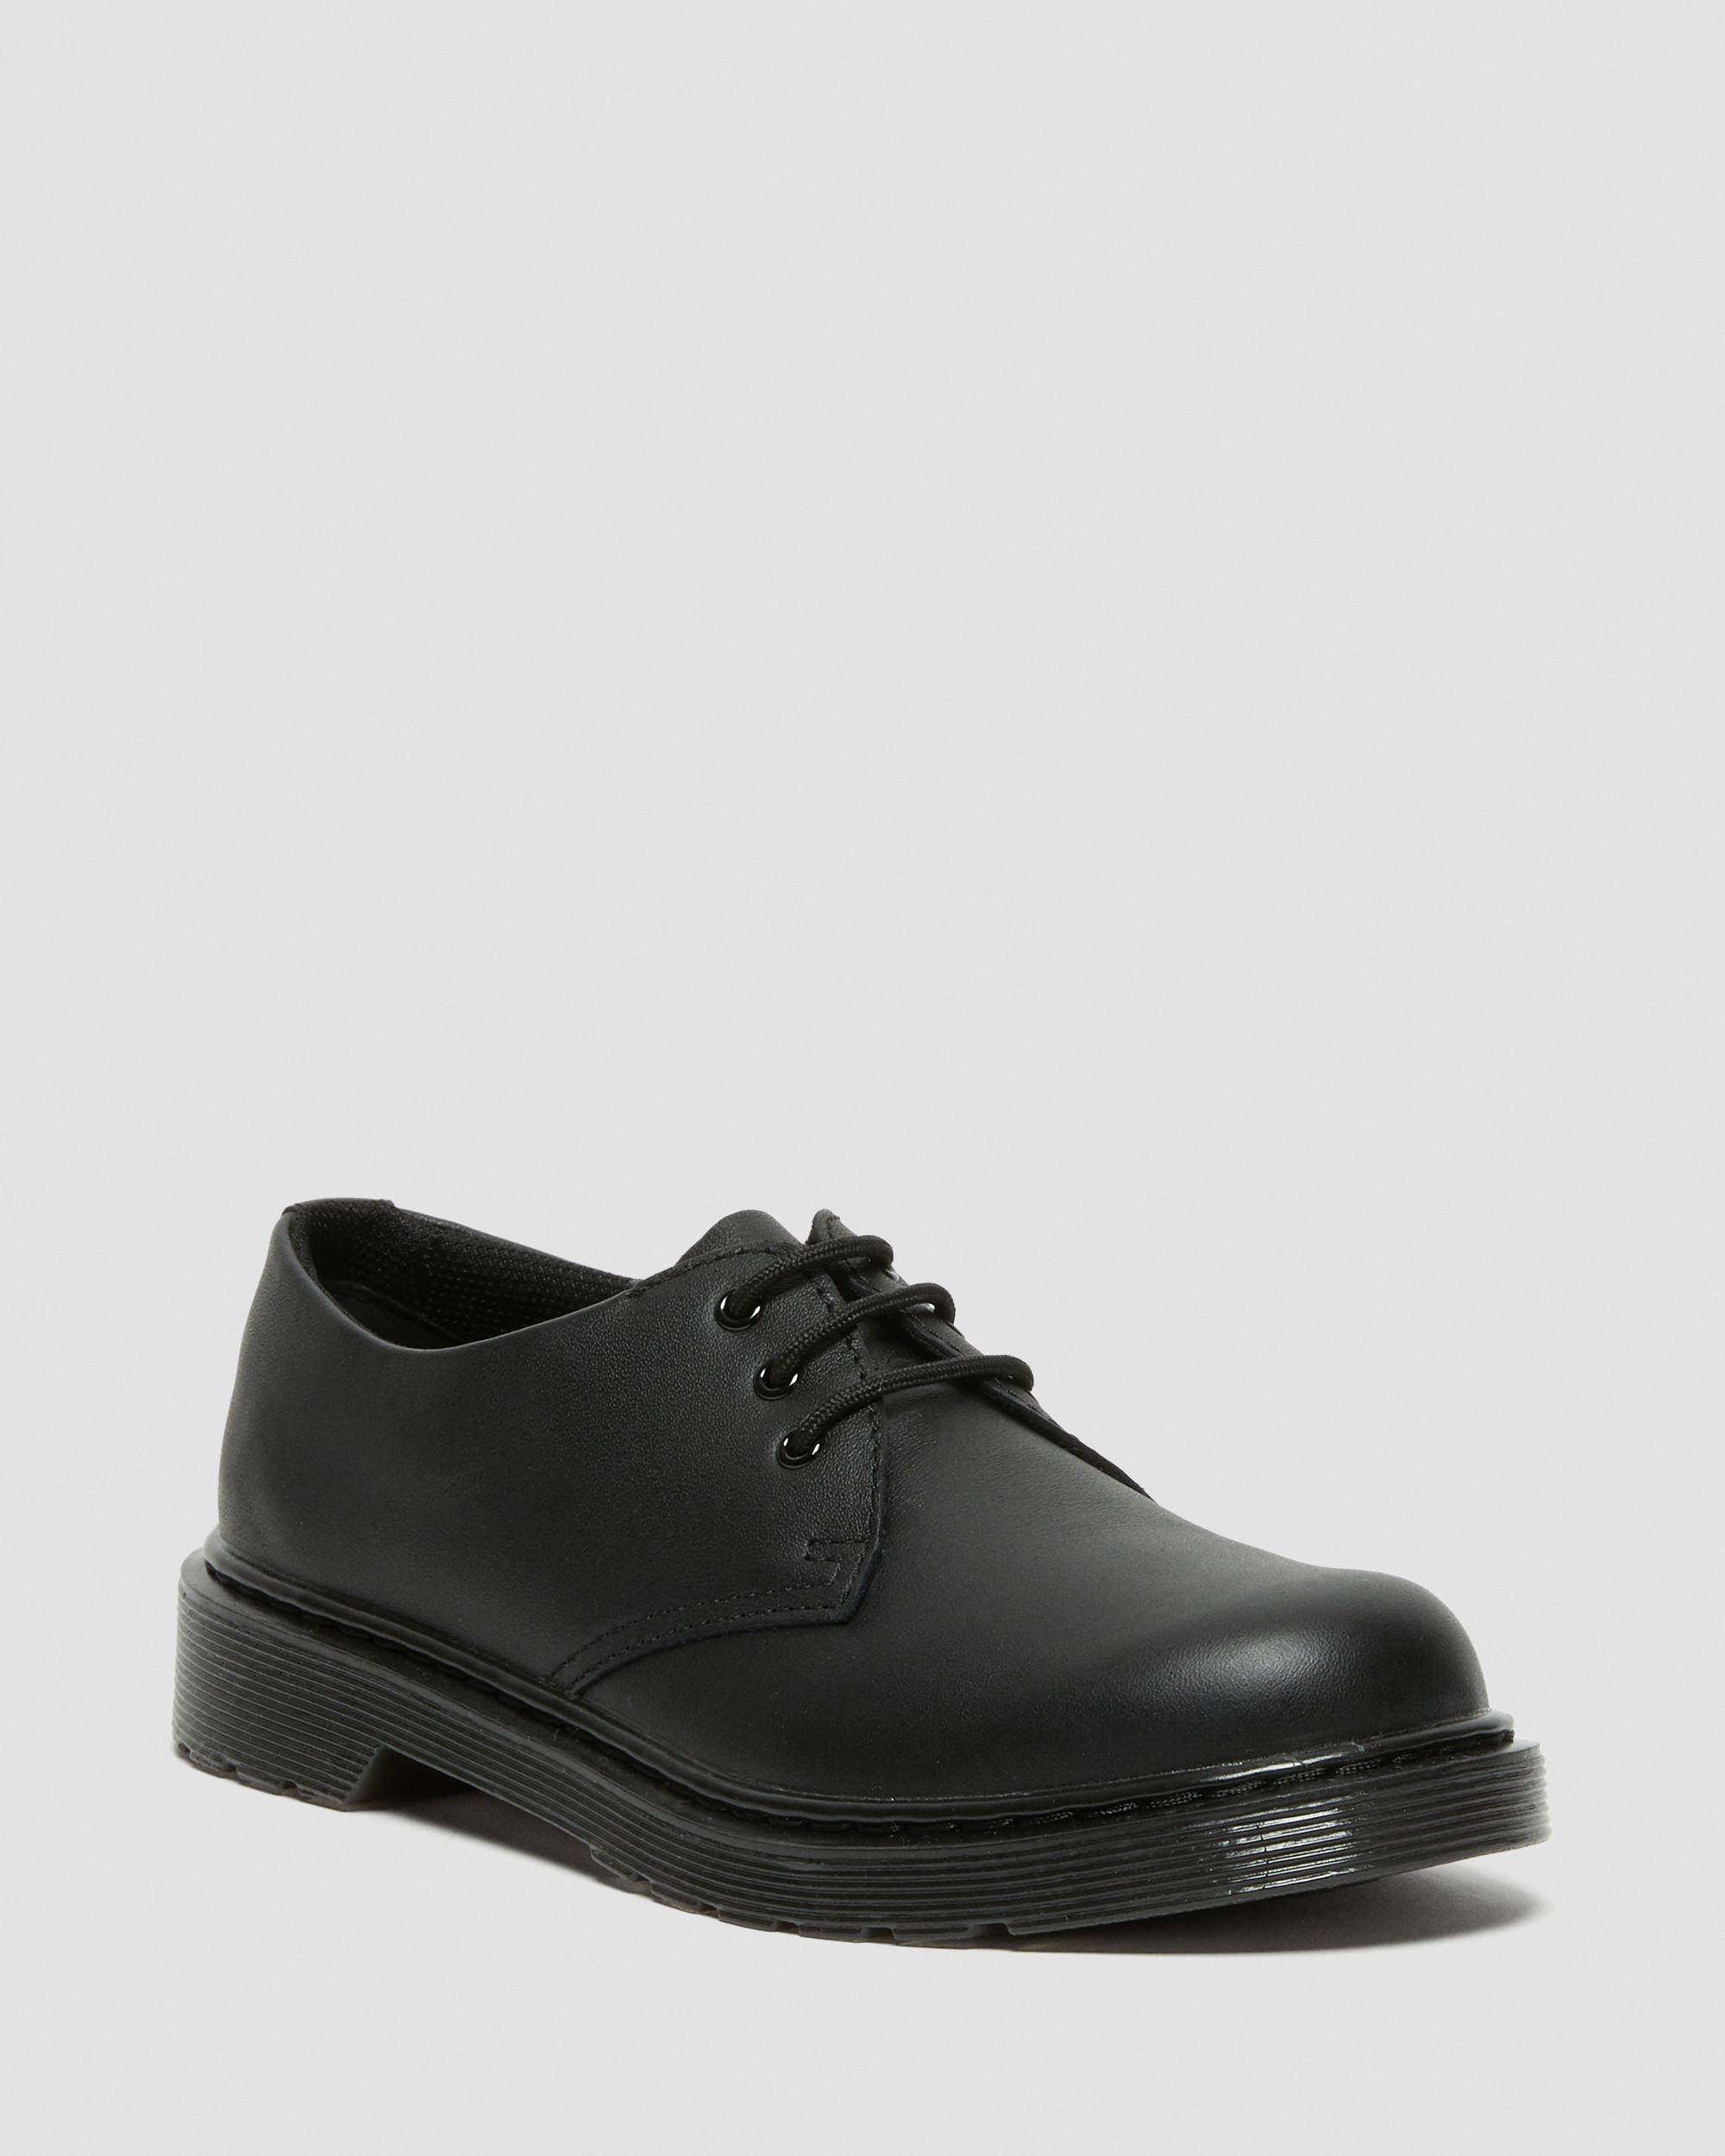 Youth 1461 Mono Softy T Leather Shoes in Black | Dr. Martens